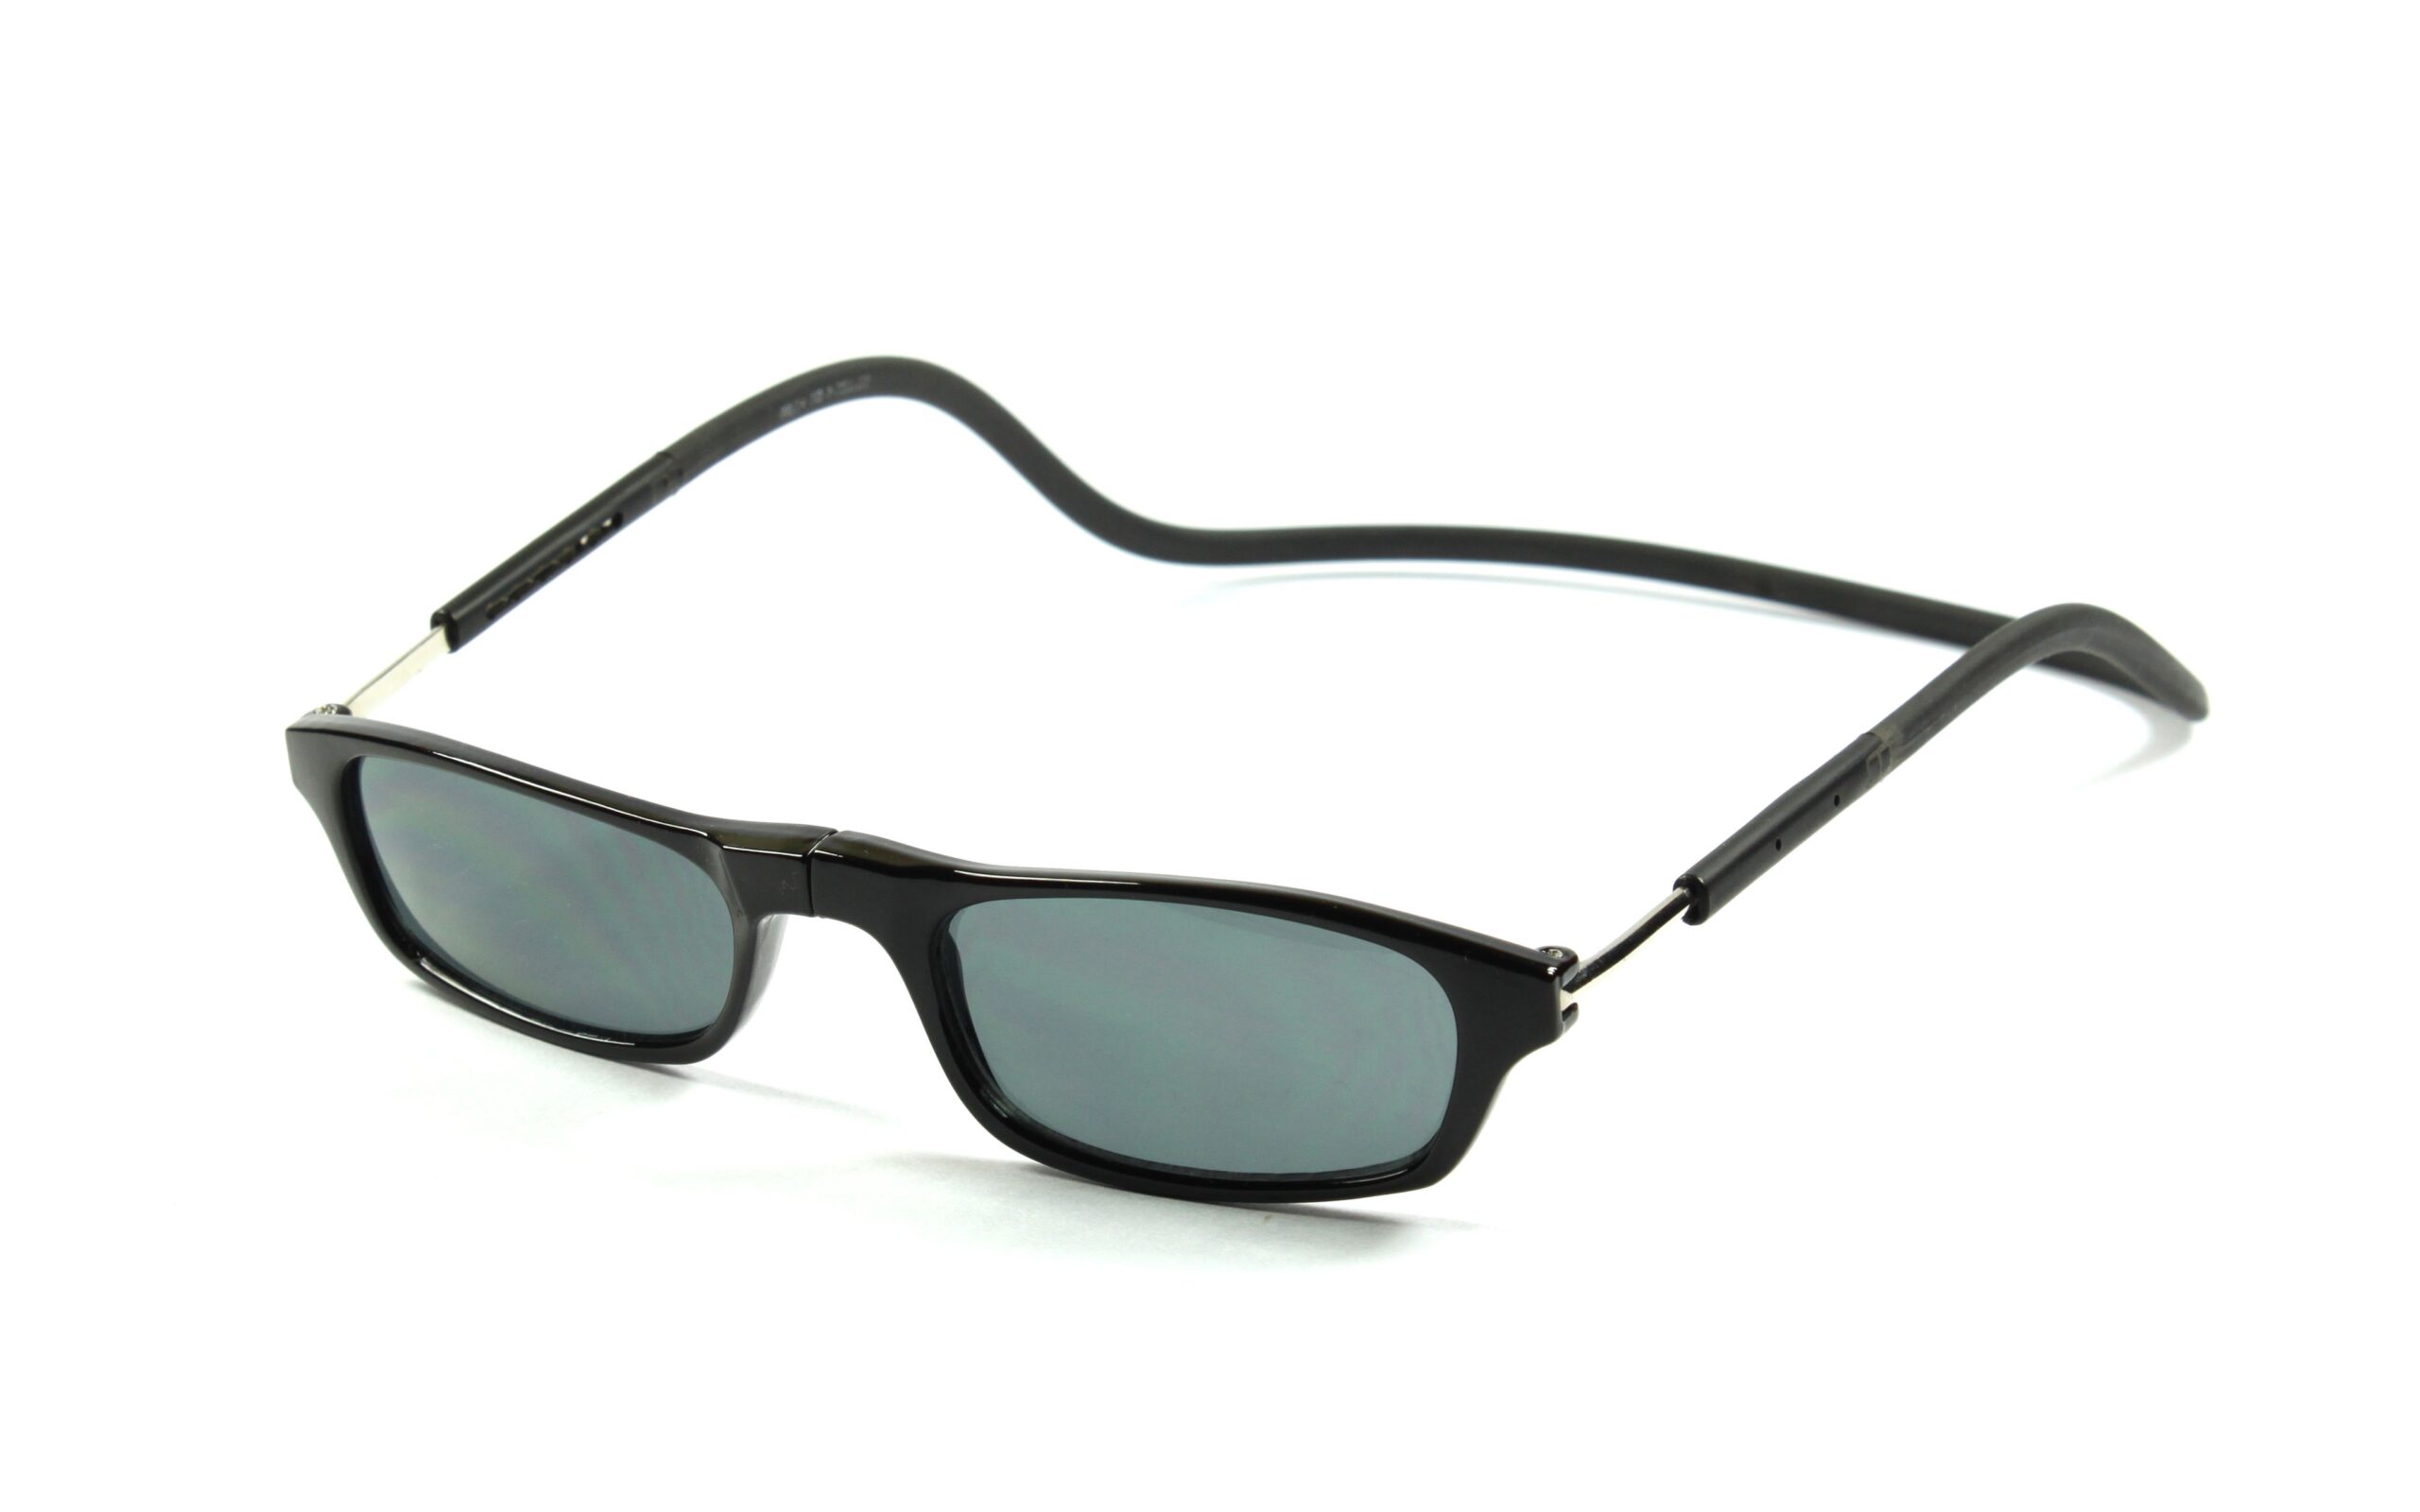 Magnetic Sunglasses available at www.igearindia.com